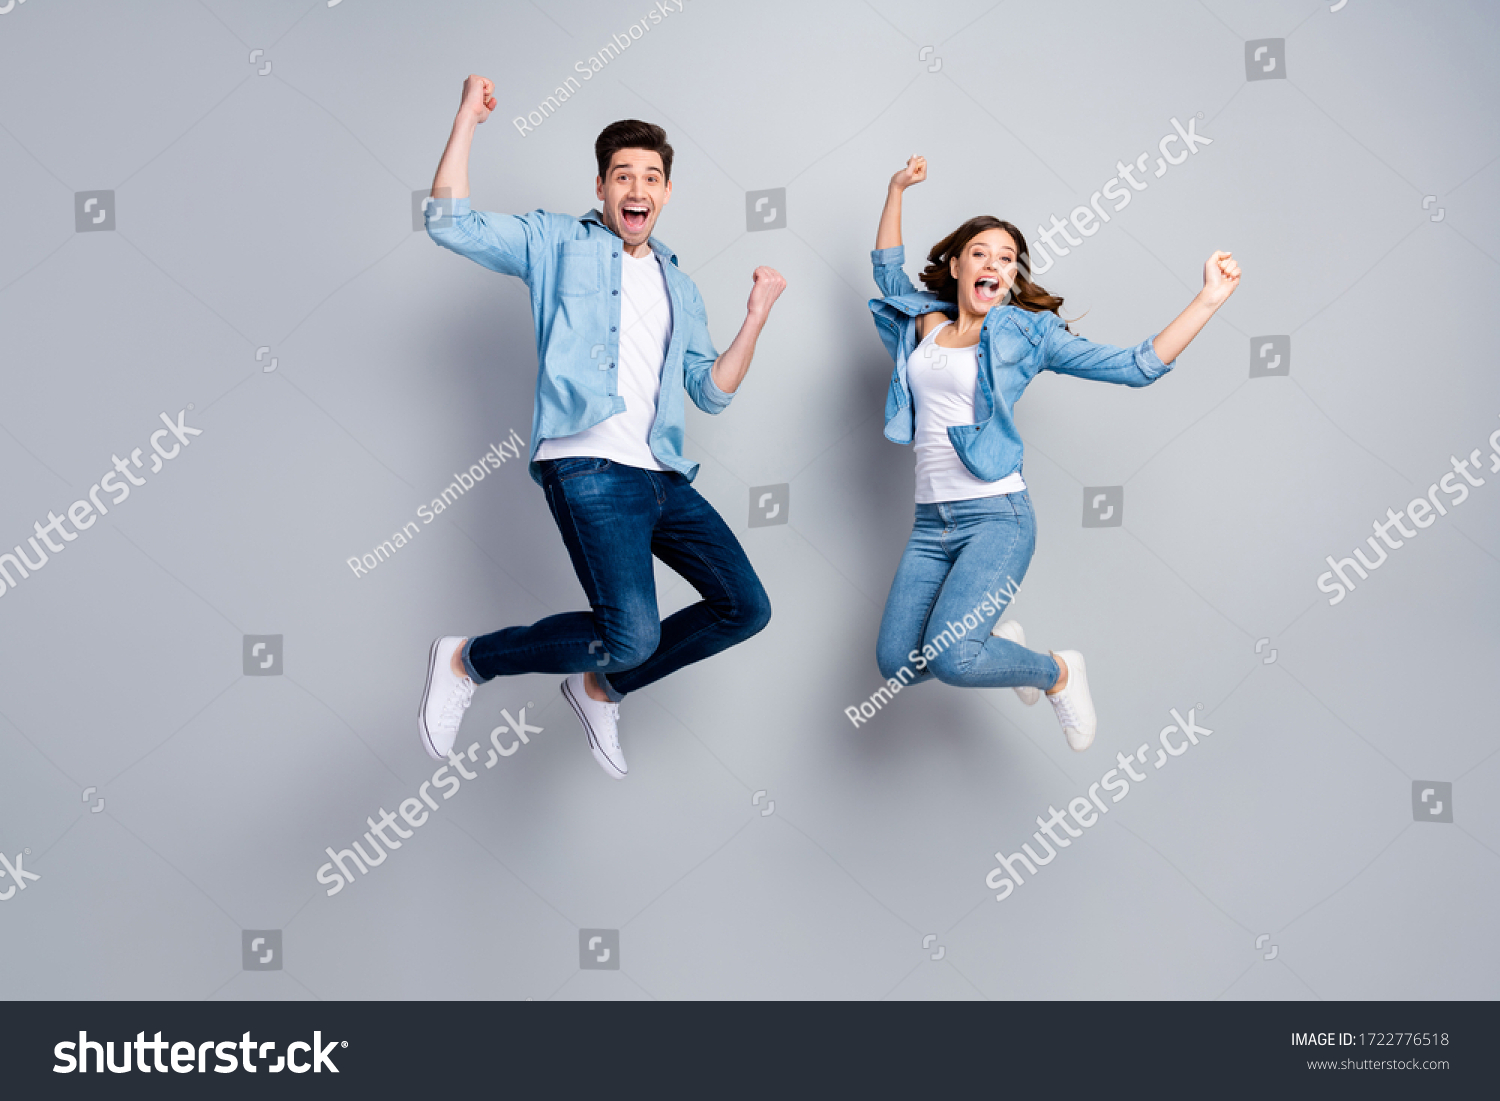 Full body photo of attractive lady handsome funny guy crazy fan jumping high up celebrating football team winning wear casual denim shirts outfit isolated grey color background #1722776518